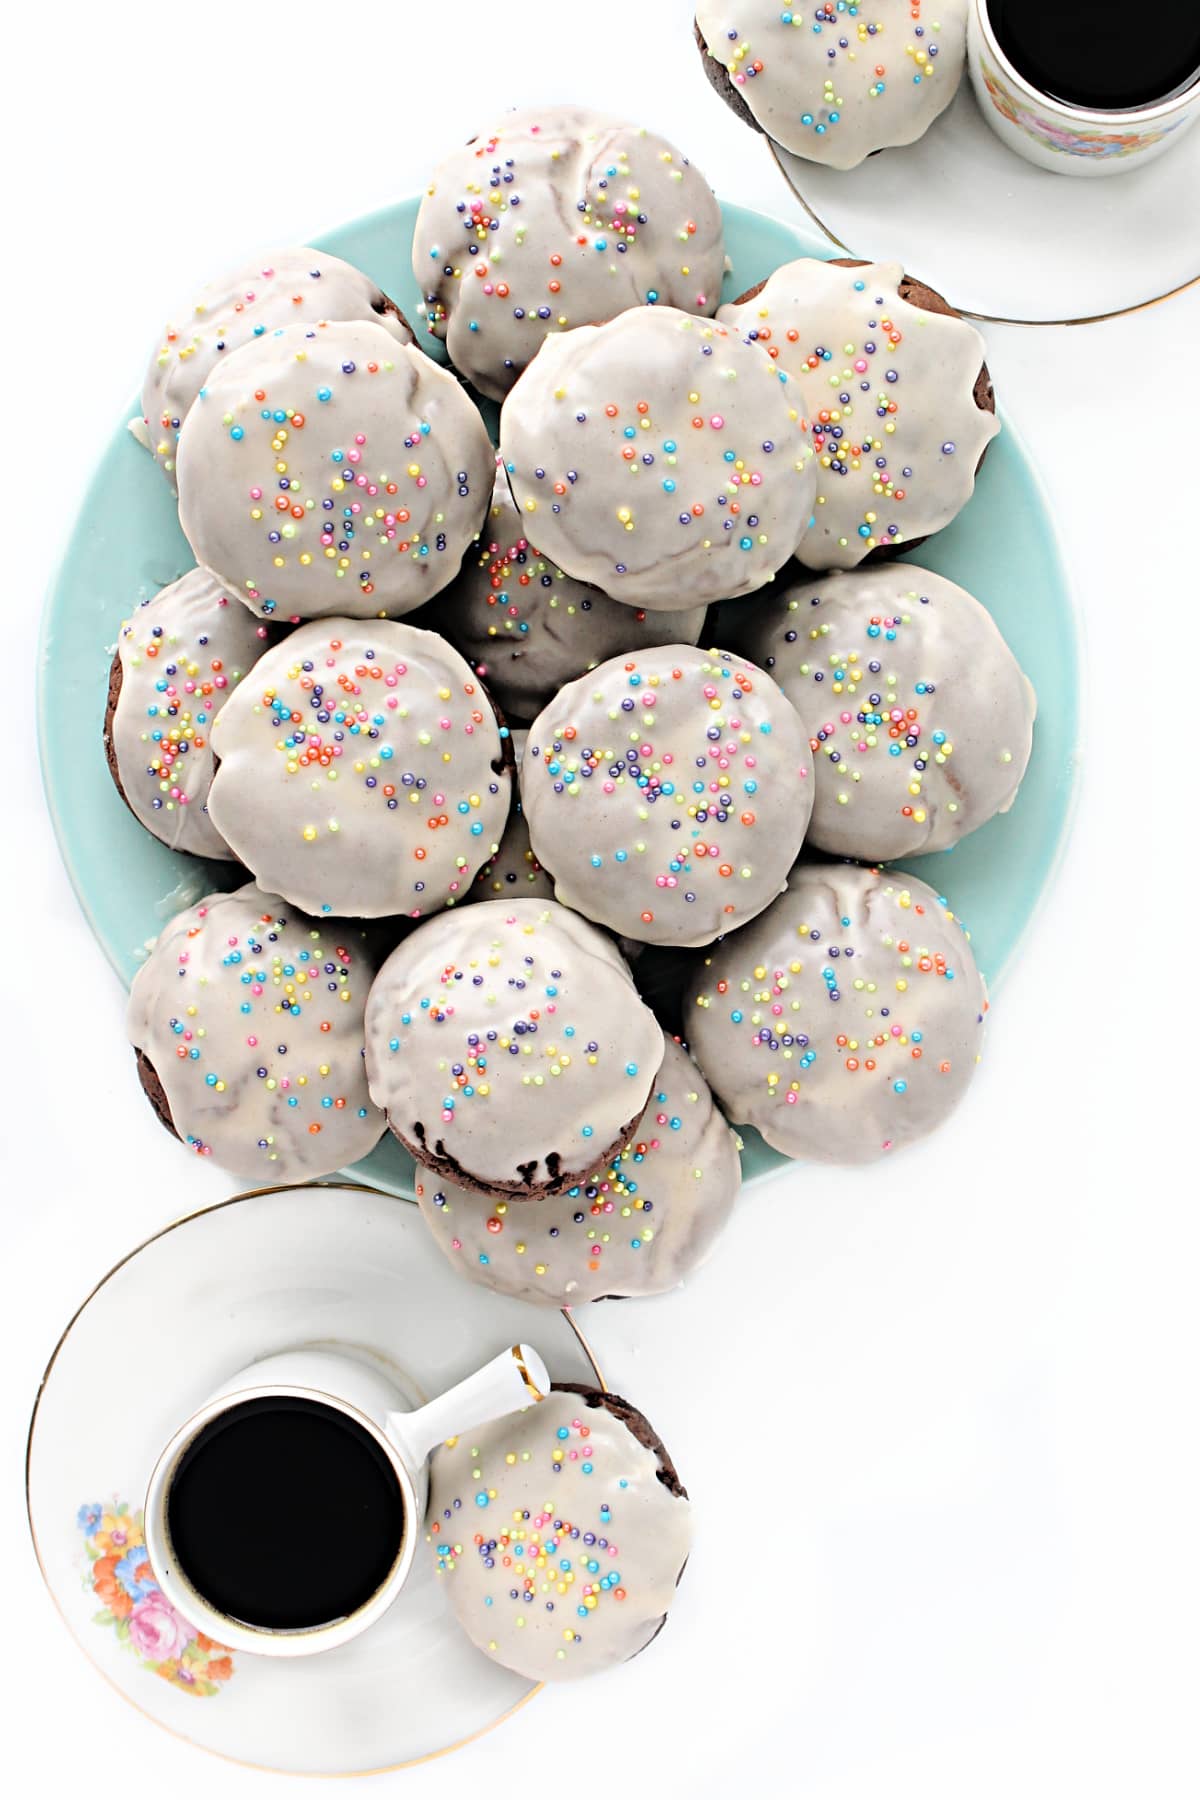 Puffy chocolate cookies with white icing and multicolored sprinkles on a plate.